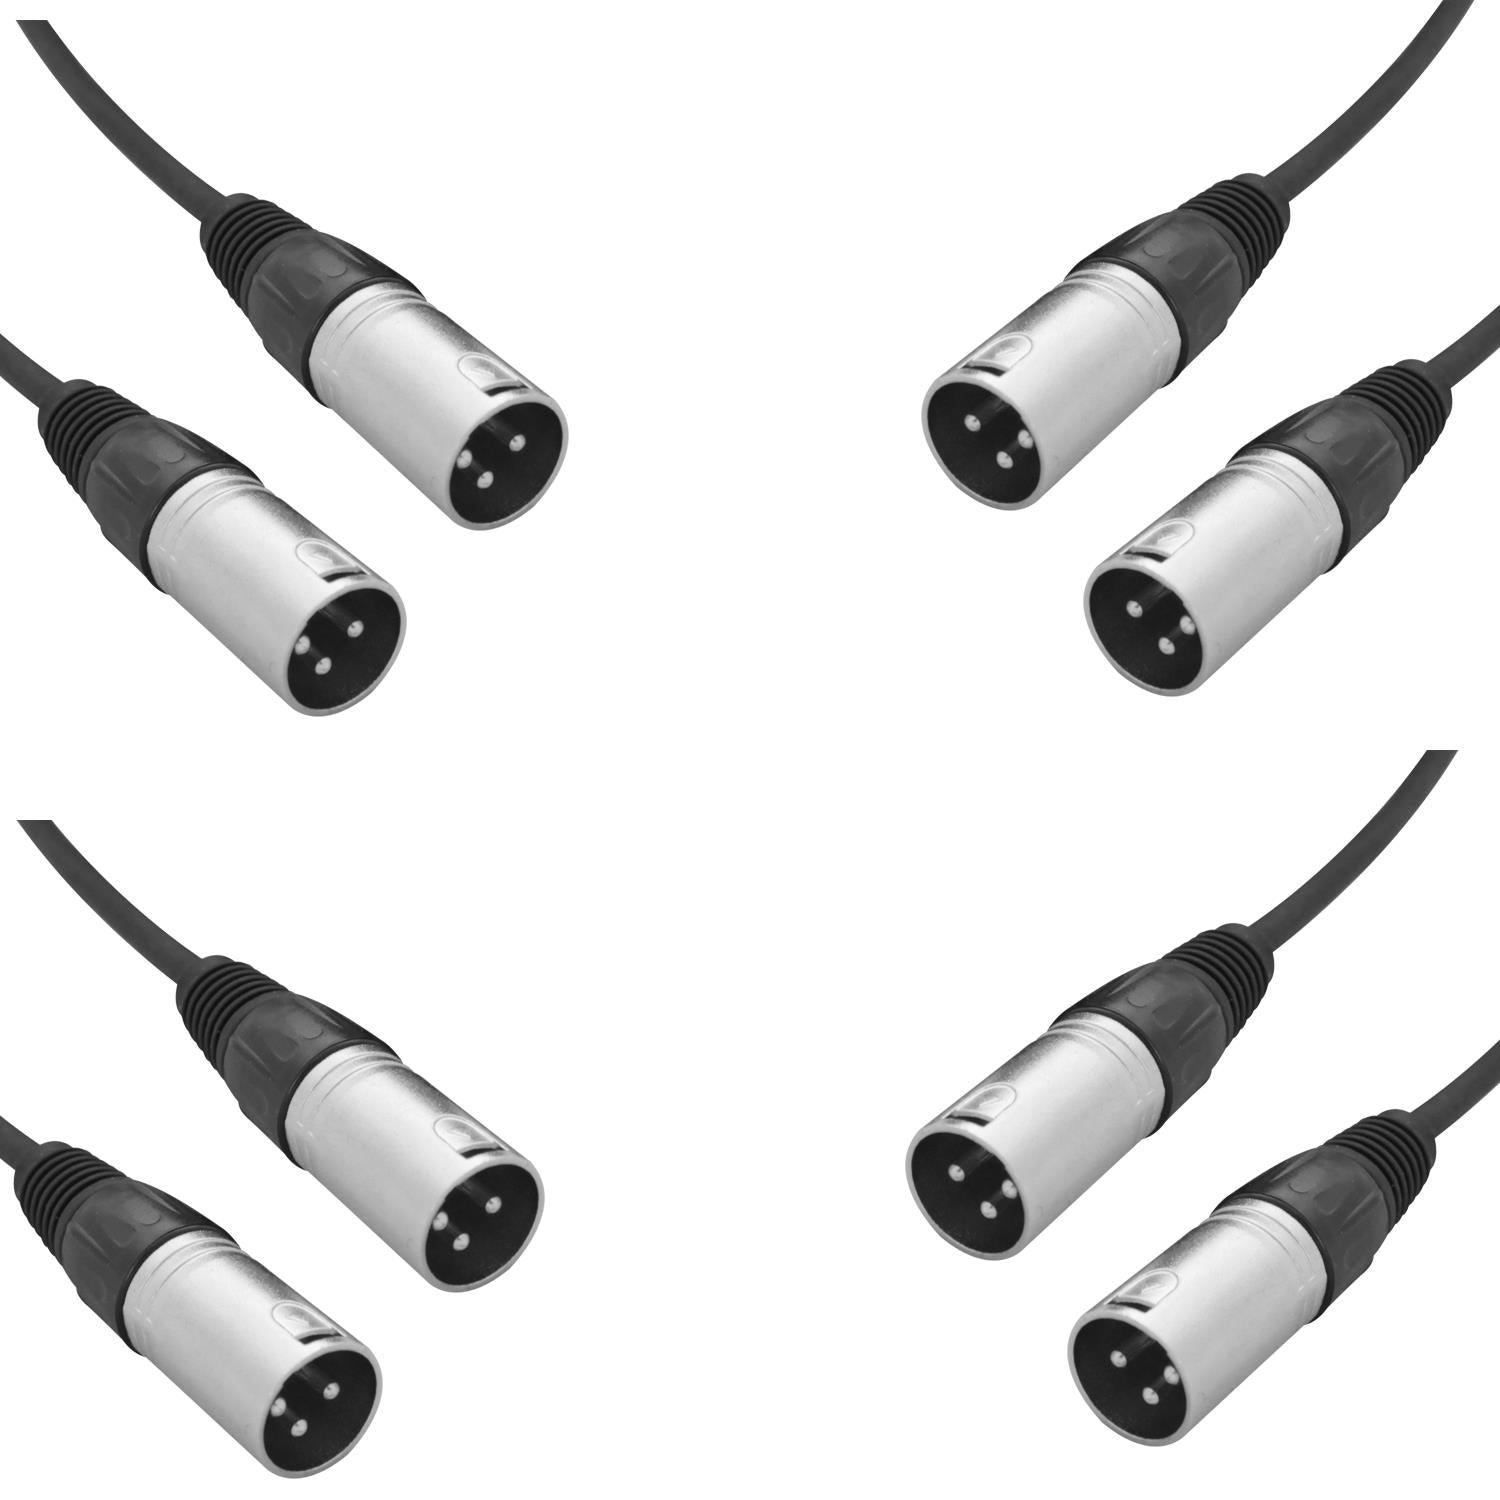 4 x W Audio 0.25M XLR Male to Male Gender Changer Adaptor Lead Cable - DY Pro Audio